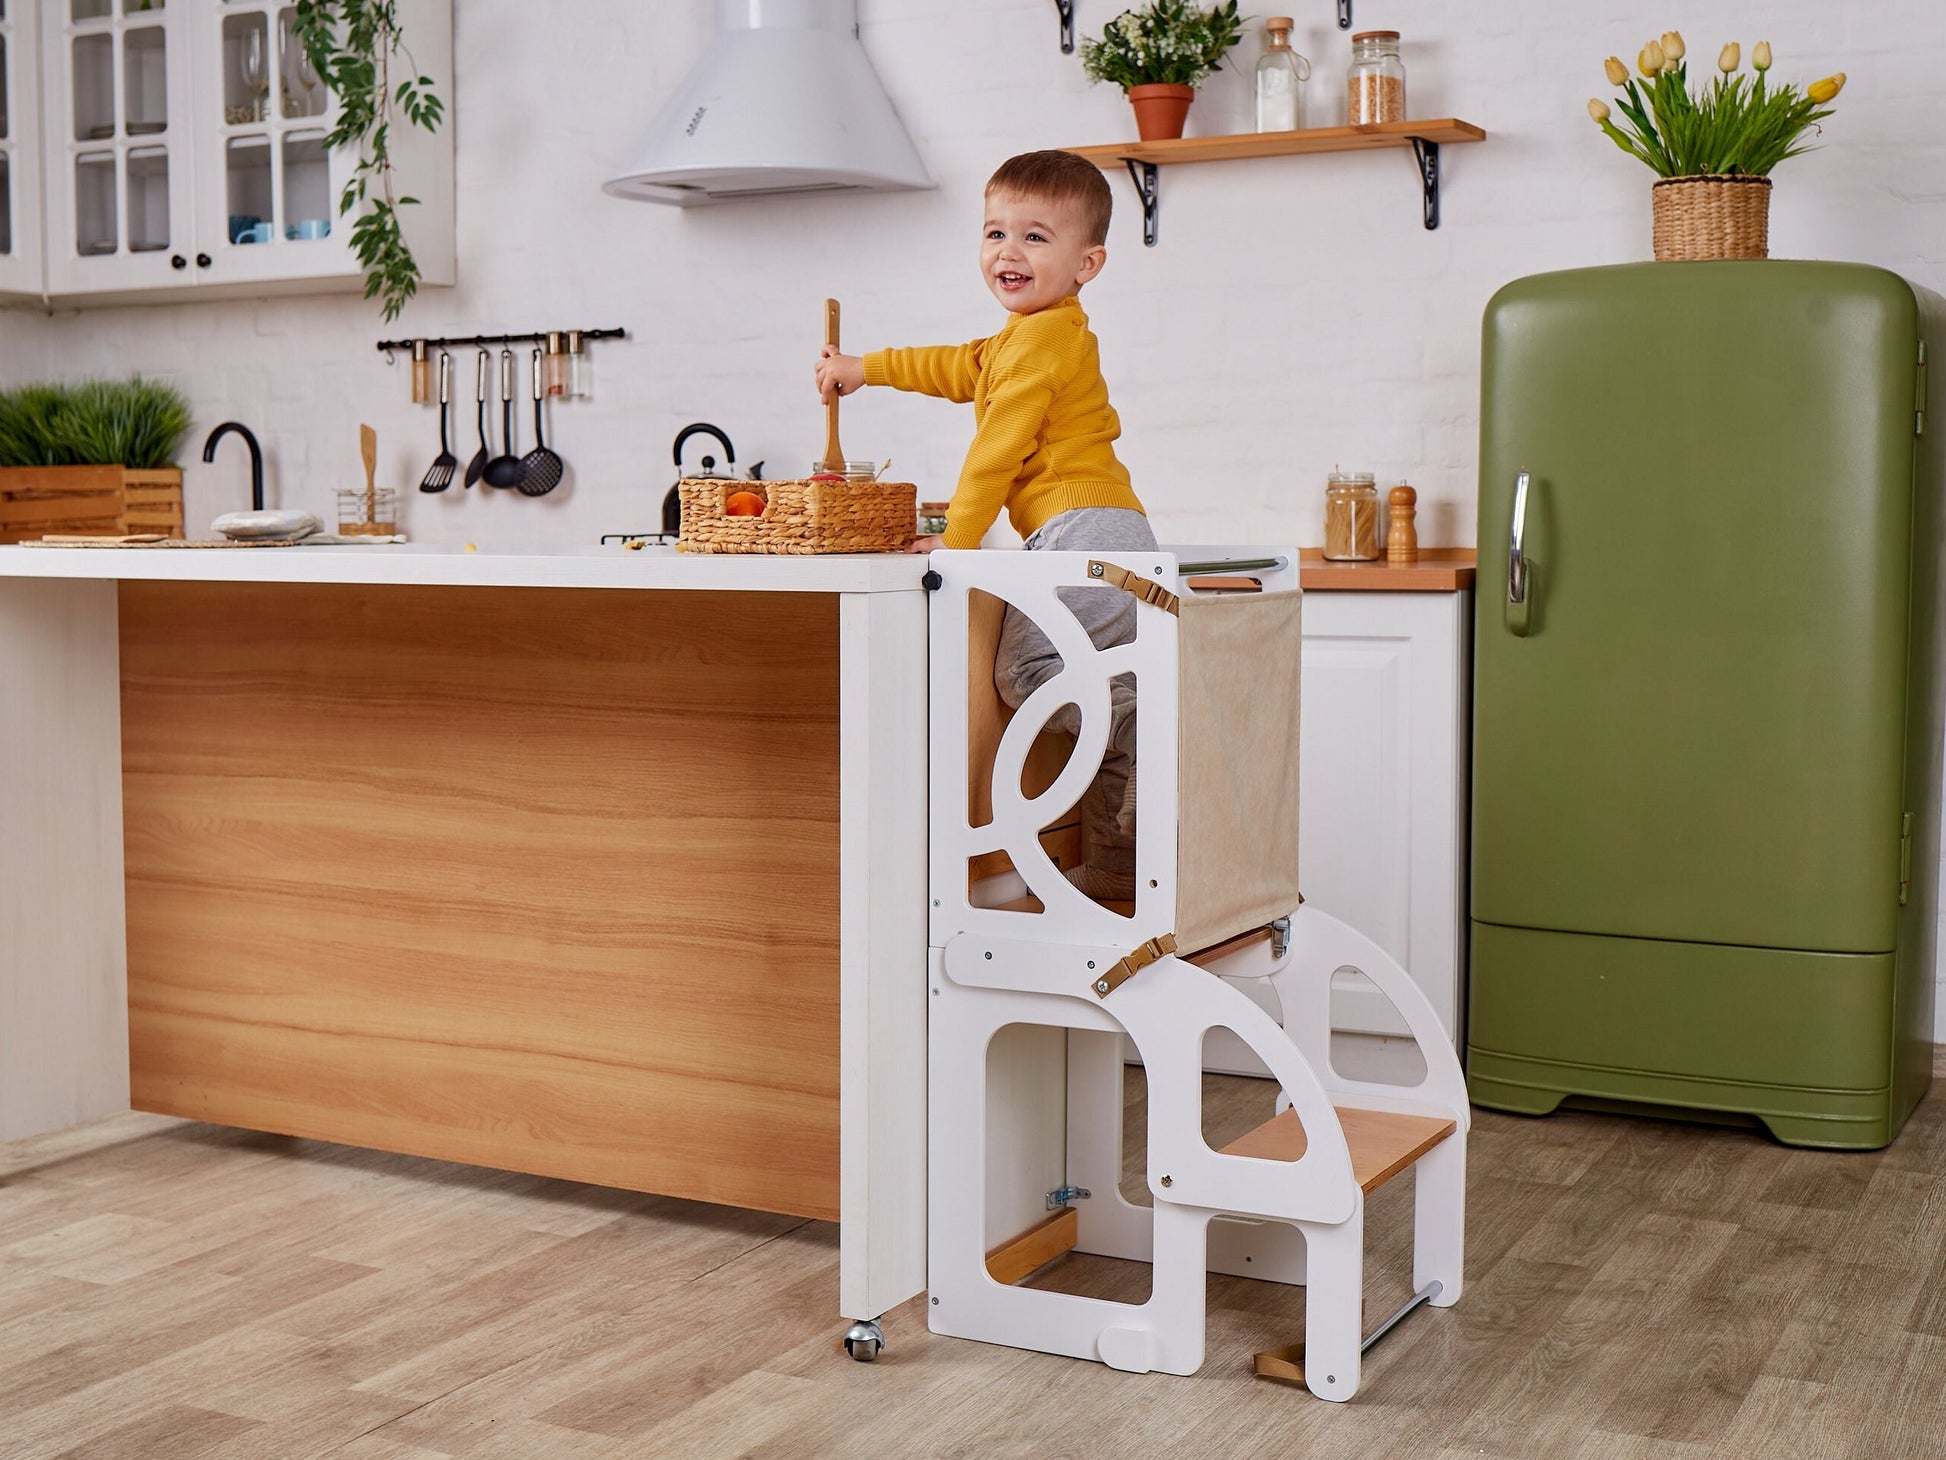 Kitchen tower toddler table 7 in 1 convertible learning kitchen step stool help tower Montessori desk & Paper roll, toddler standing tower